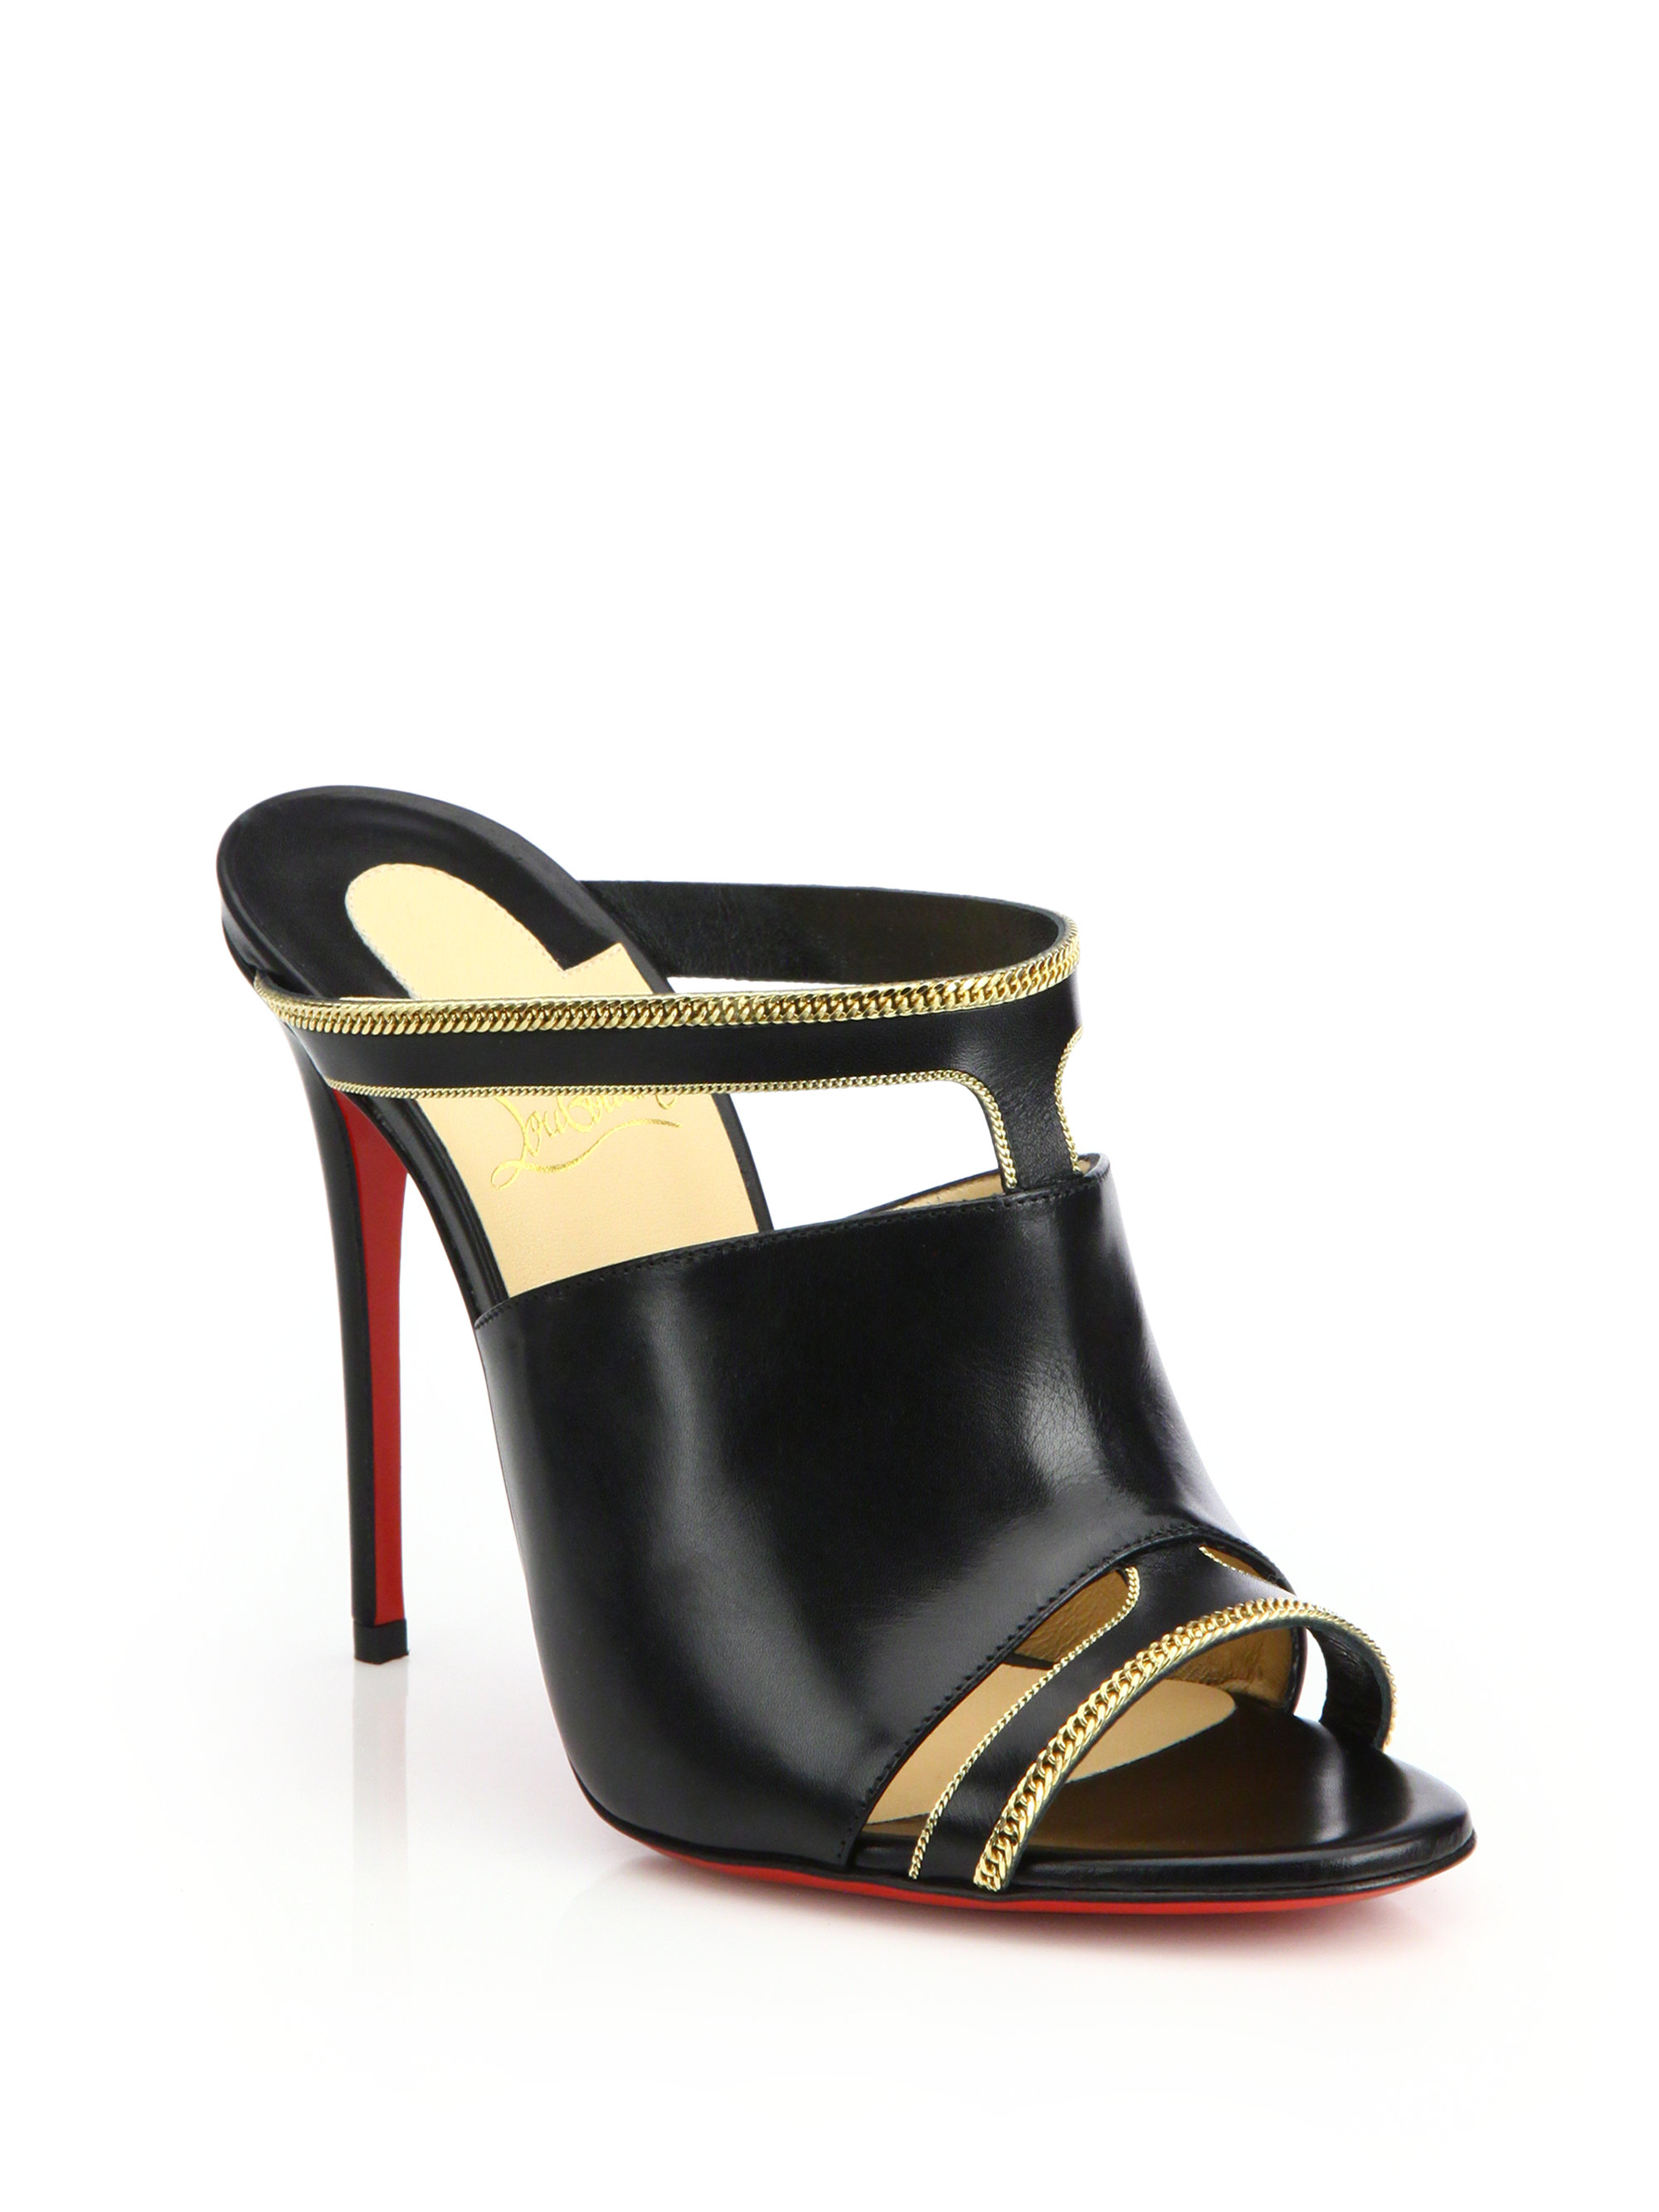 christian louboutin sandals Gold chain black patent leather ...  